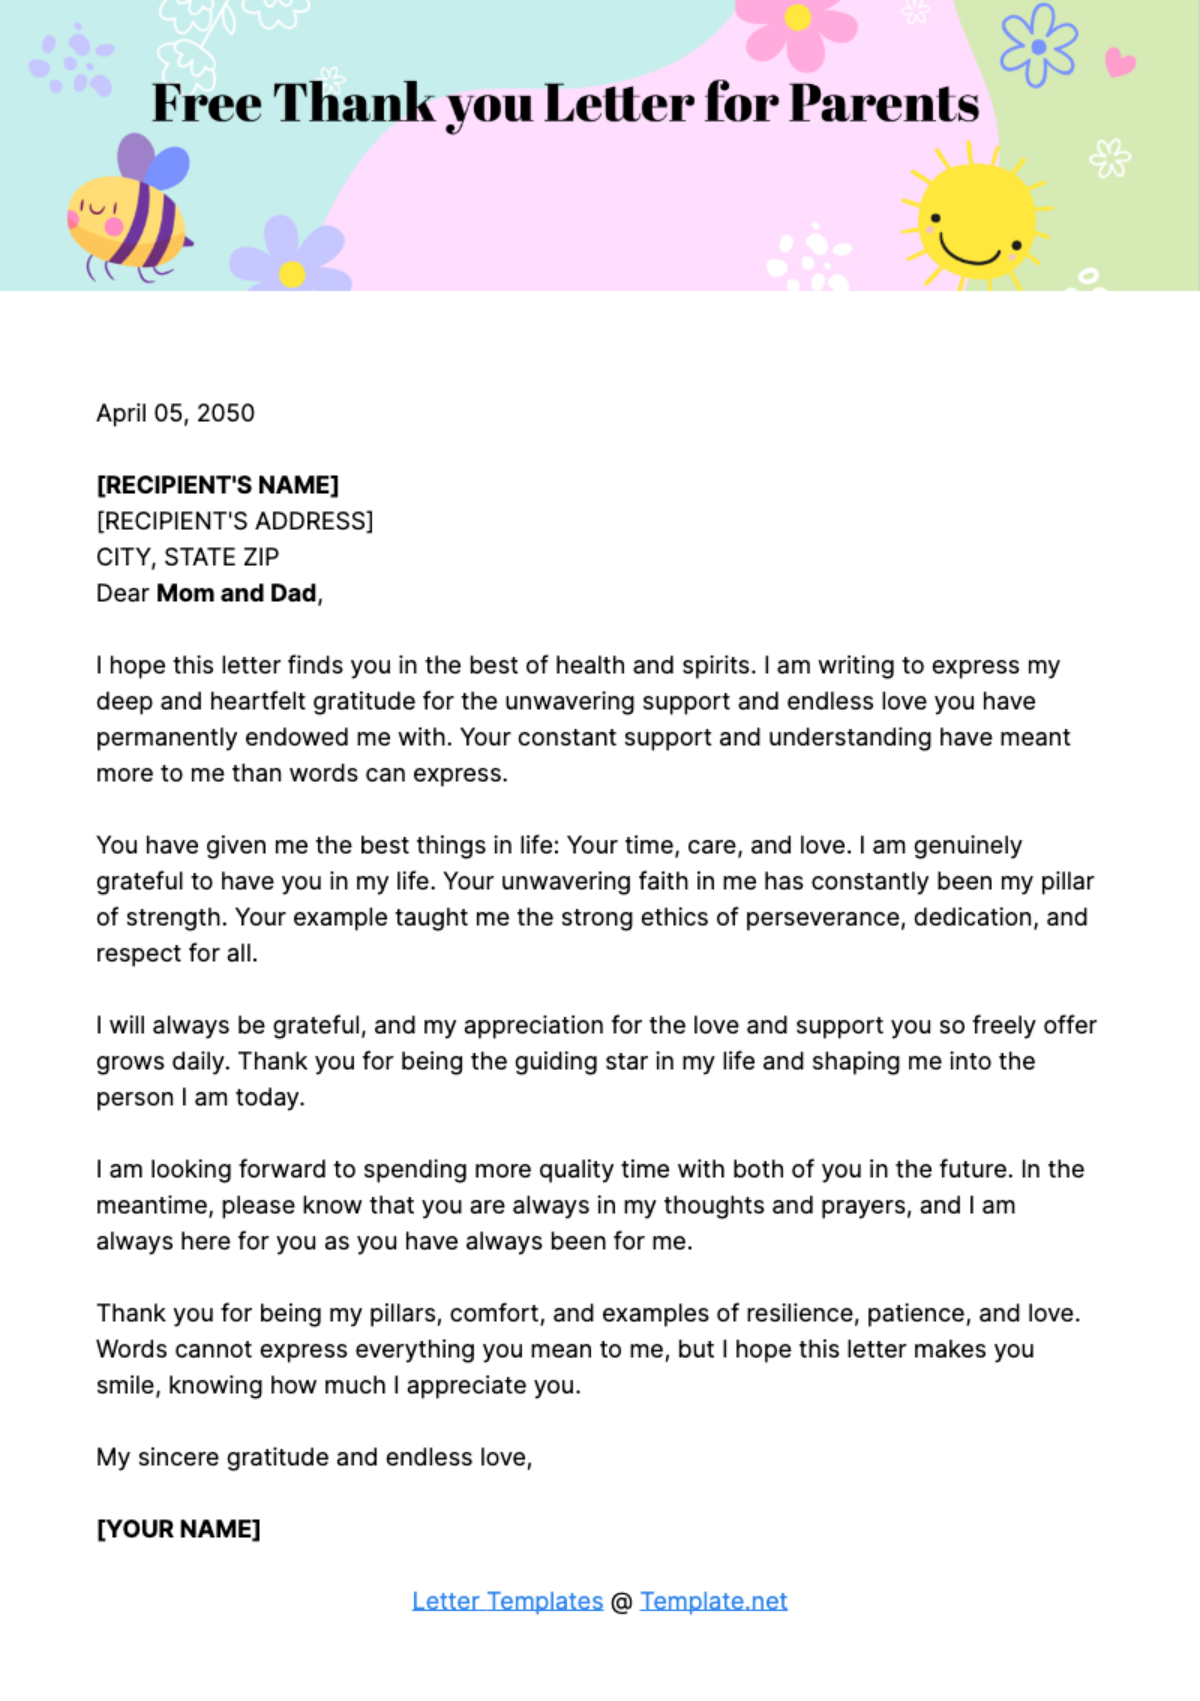 Thank you Letter for Parents Template